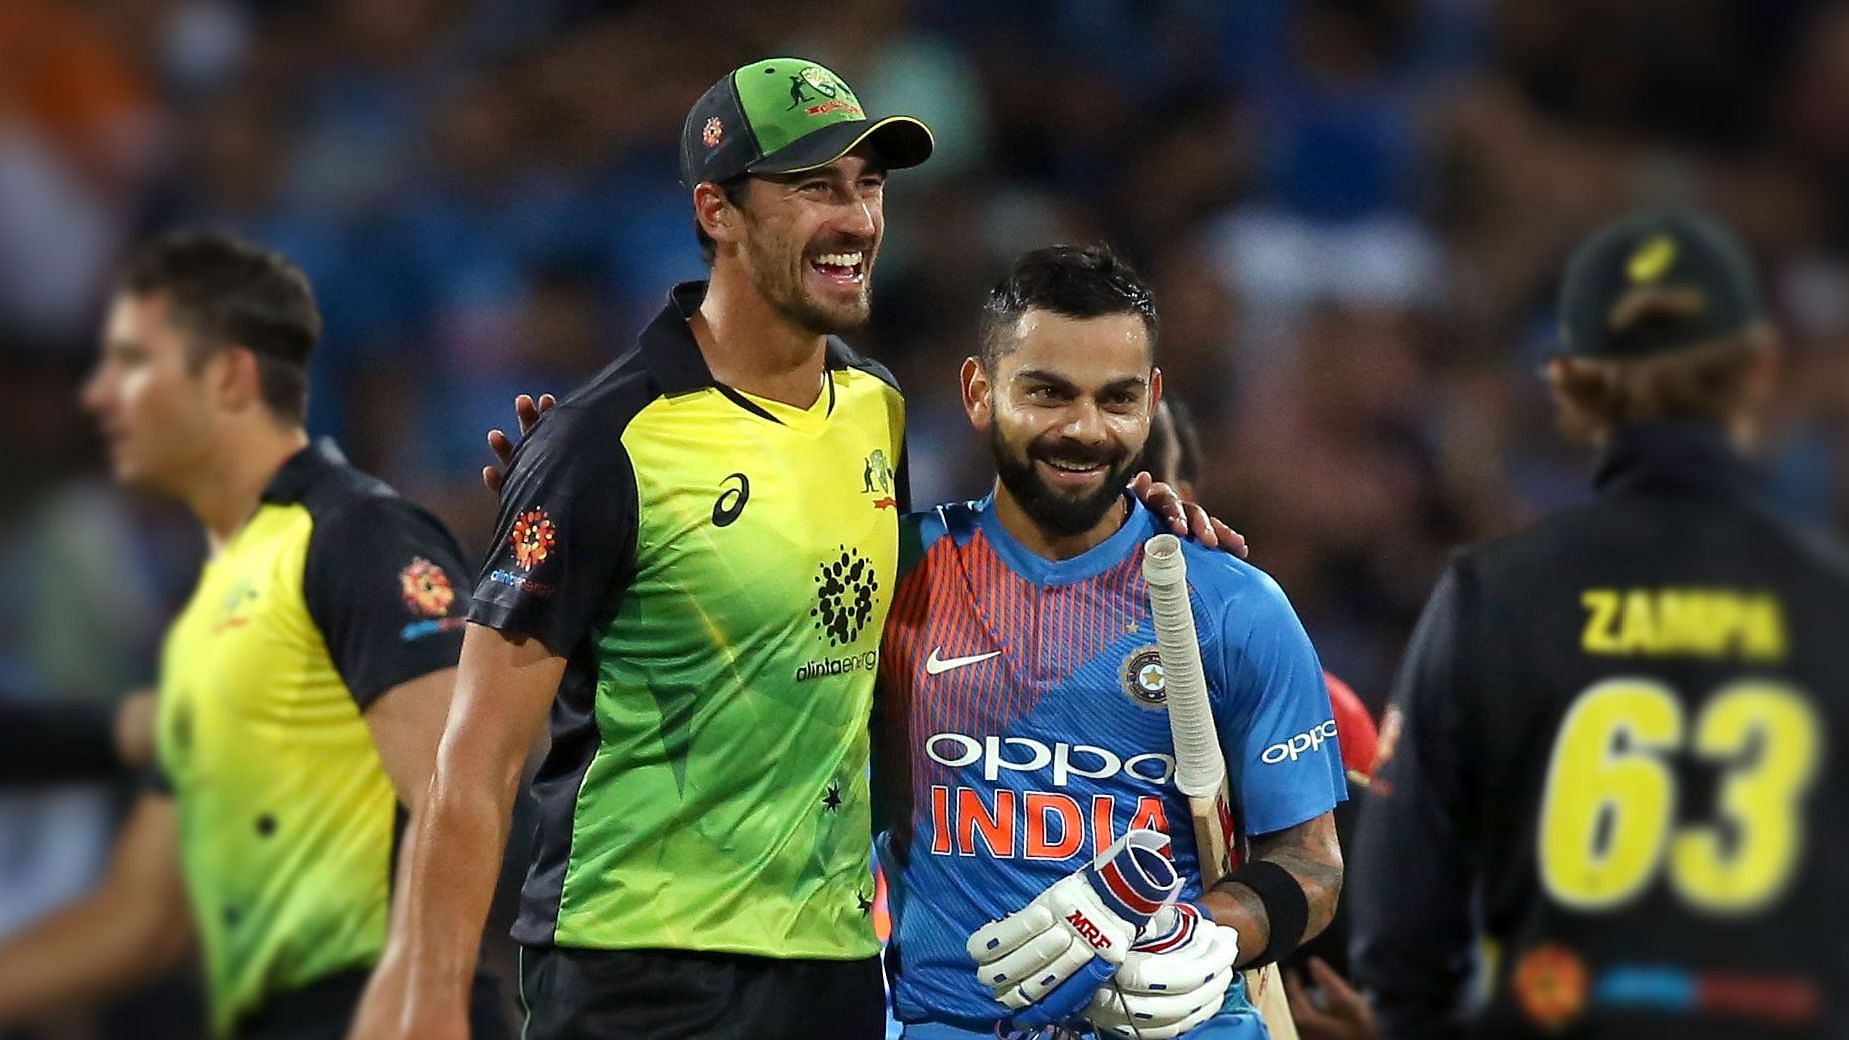 India beat Australia by 6 wickets in the third and final T20I at Sydney.